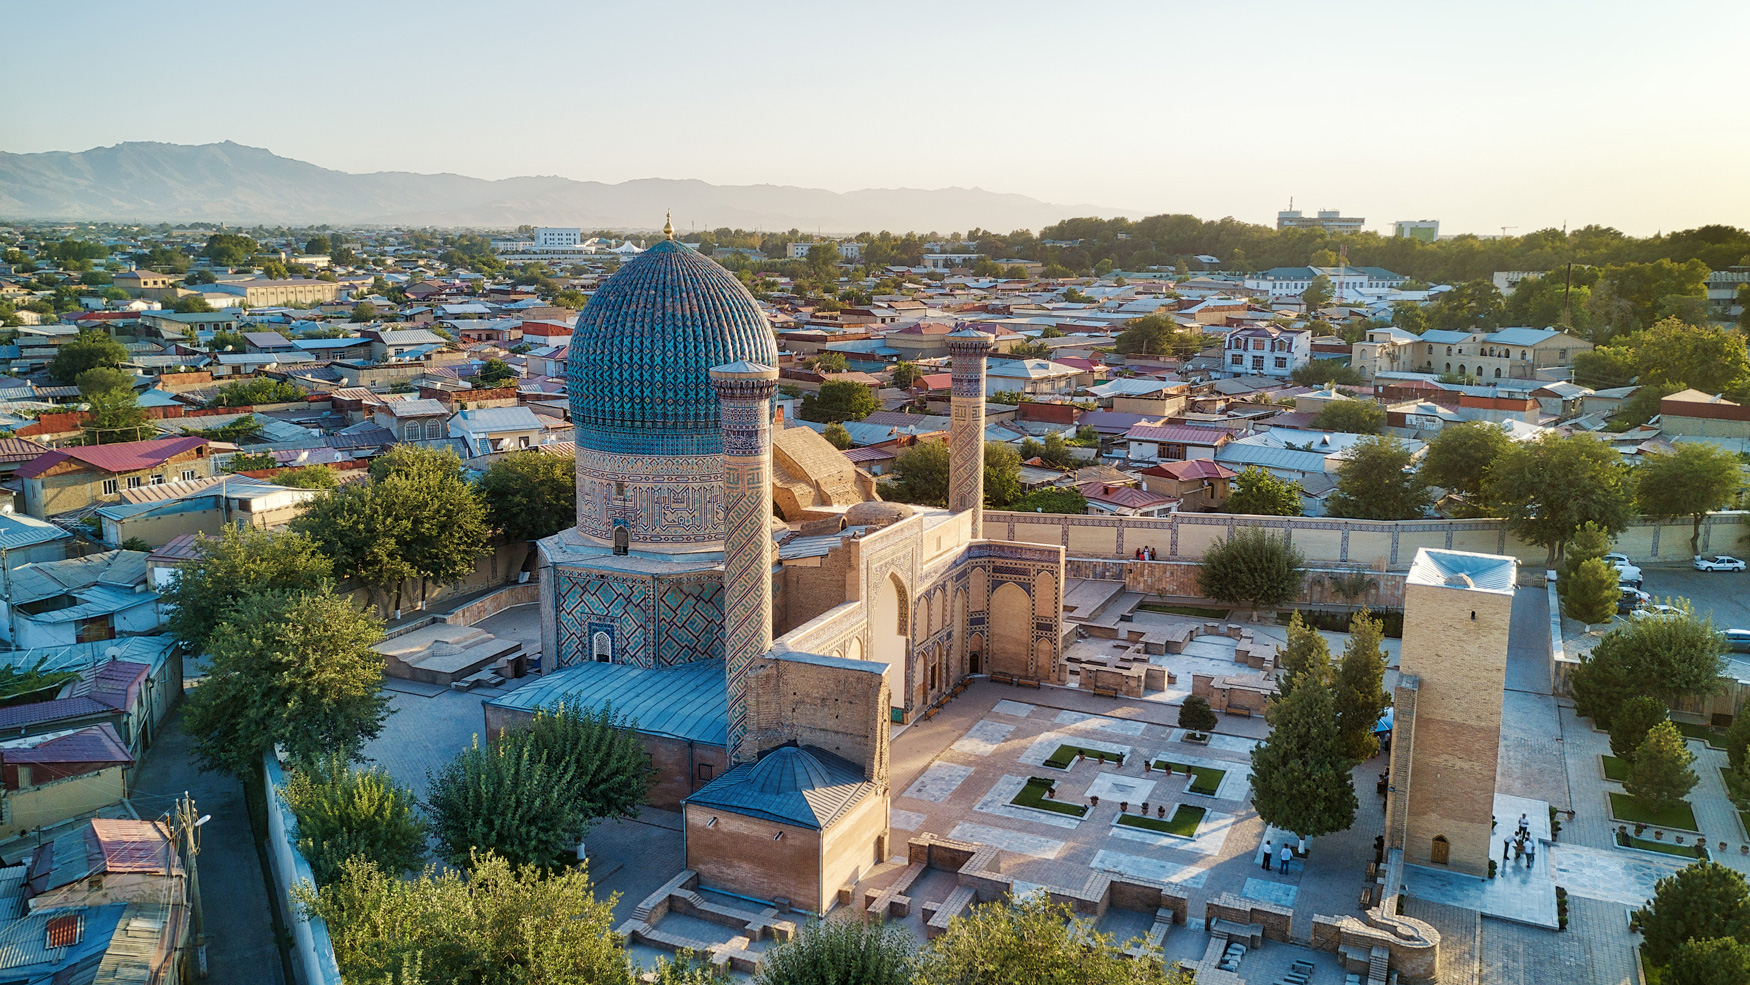 Samarkand, Uzbekistan is one city where AECOM is helping EBRD and the Regional Government develop a Green City Action Plan (GCAP) to accelerate climate action